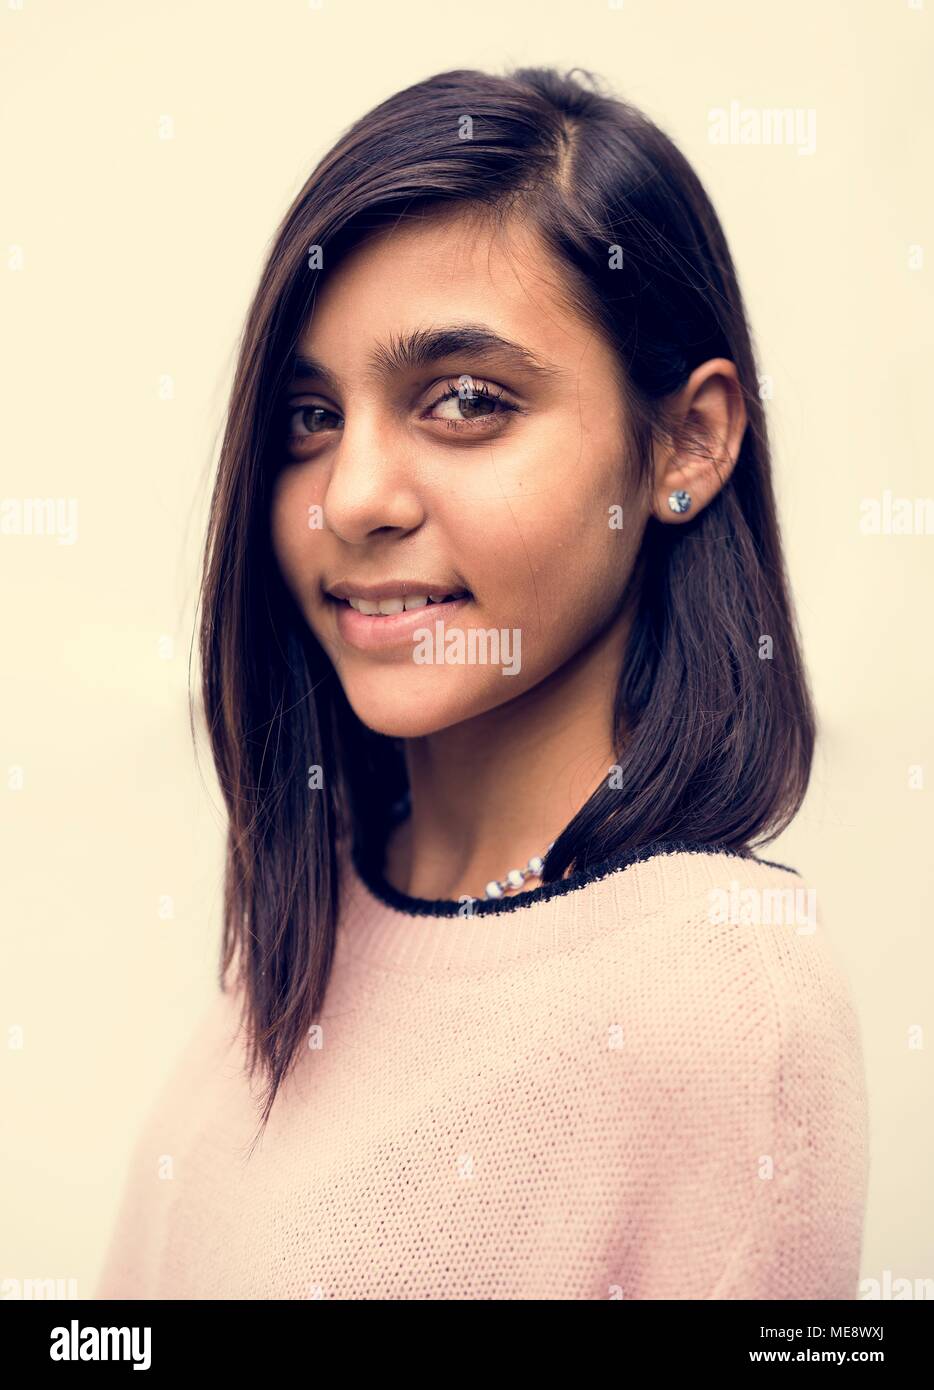 A Cheerful middle eastern girl Stock Photo